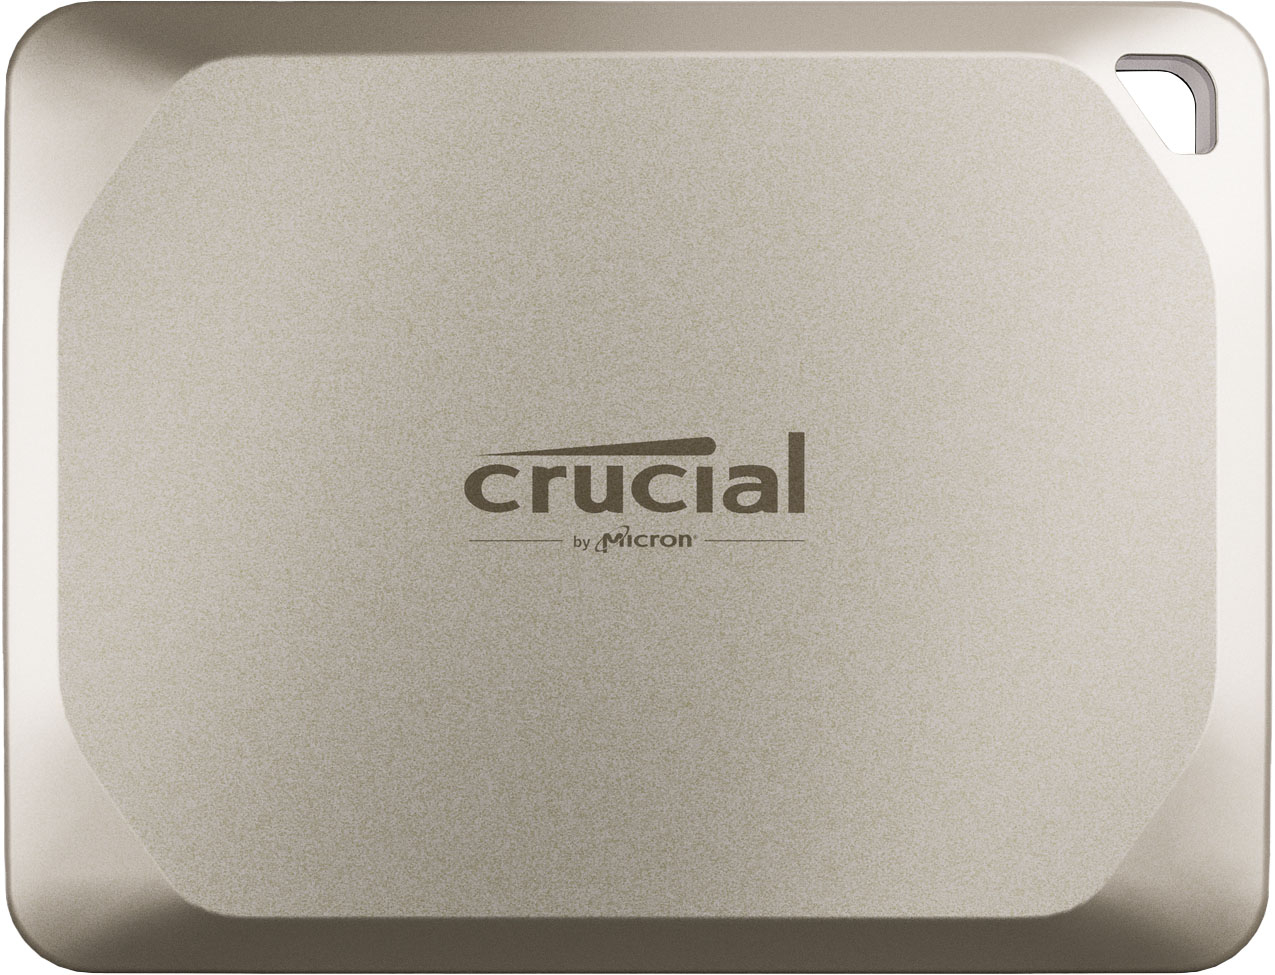 Crucial X9 And X10 Pro Review: The Best Fast External Flash Drives?